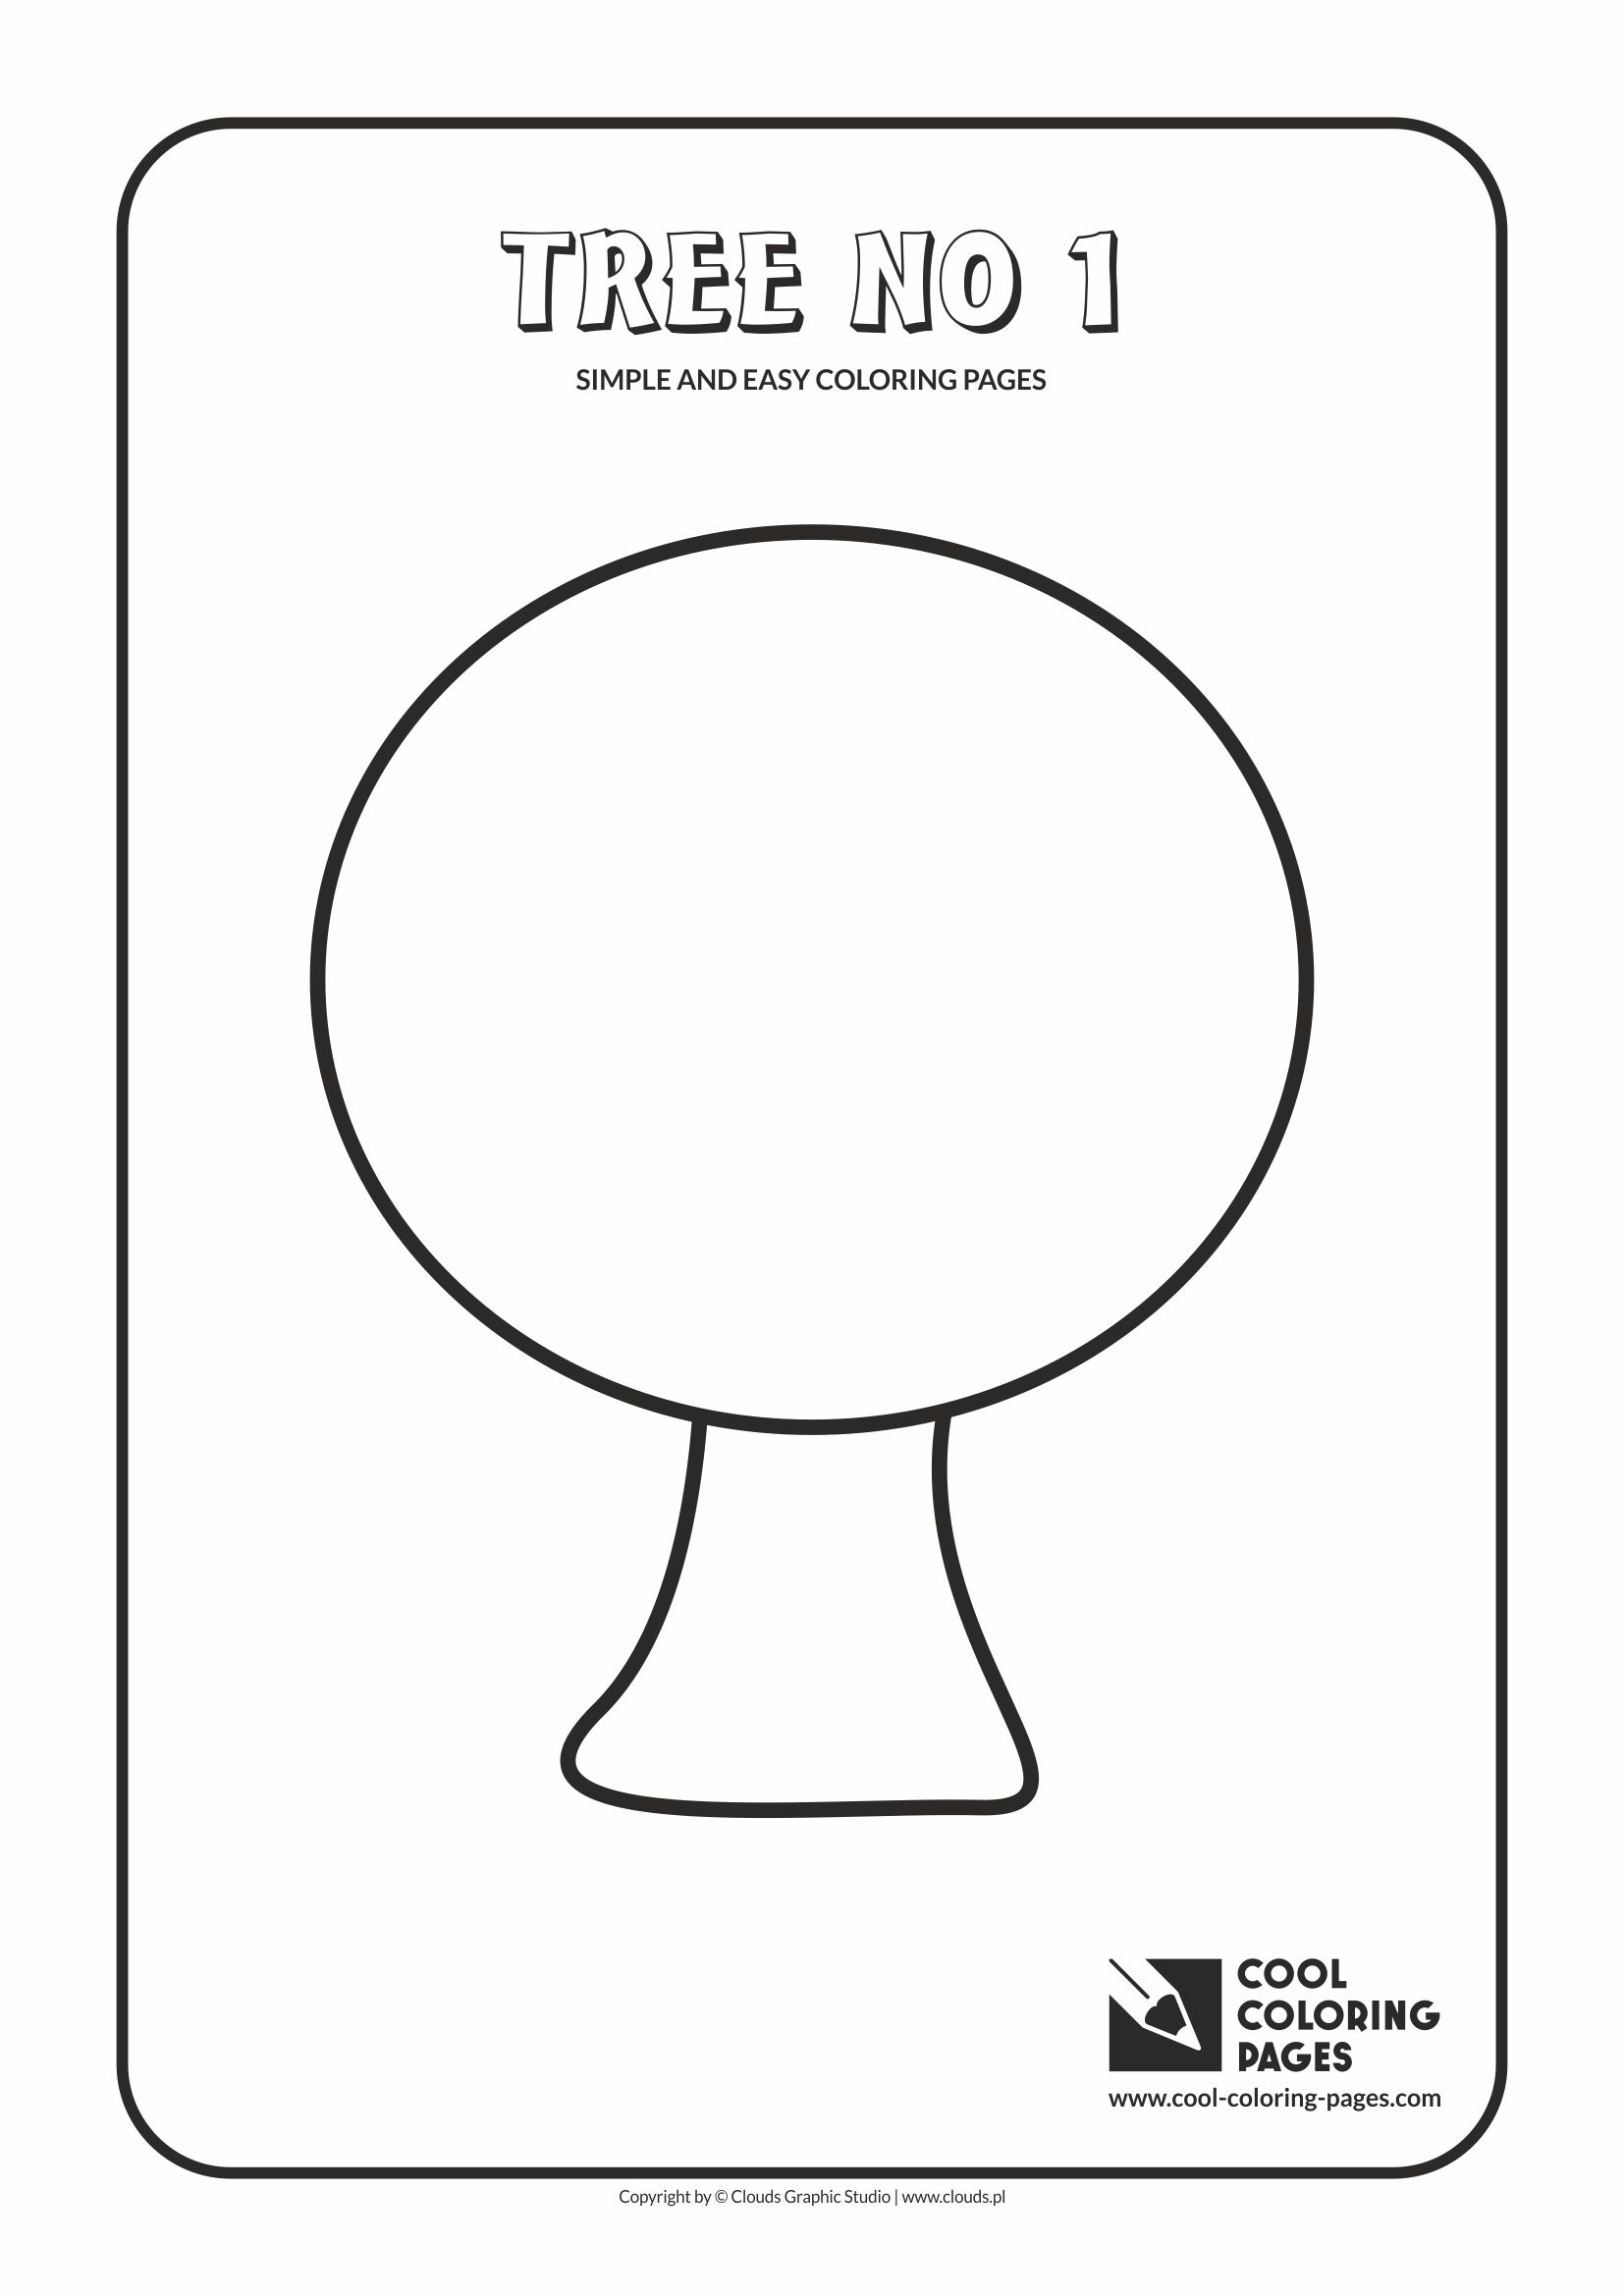 Simple and easy coloring pages for toddlers - Tree no 1